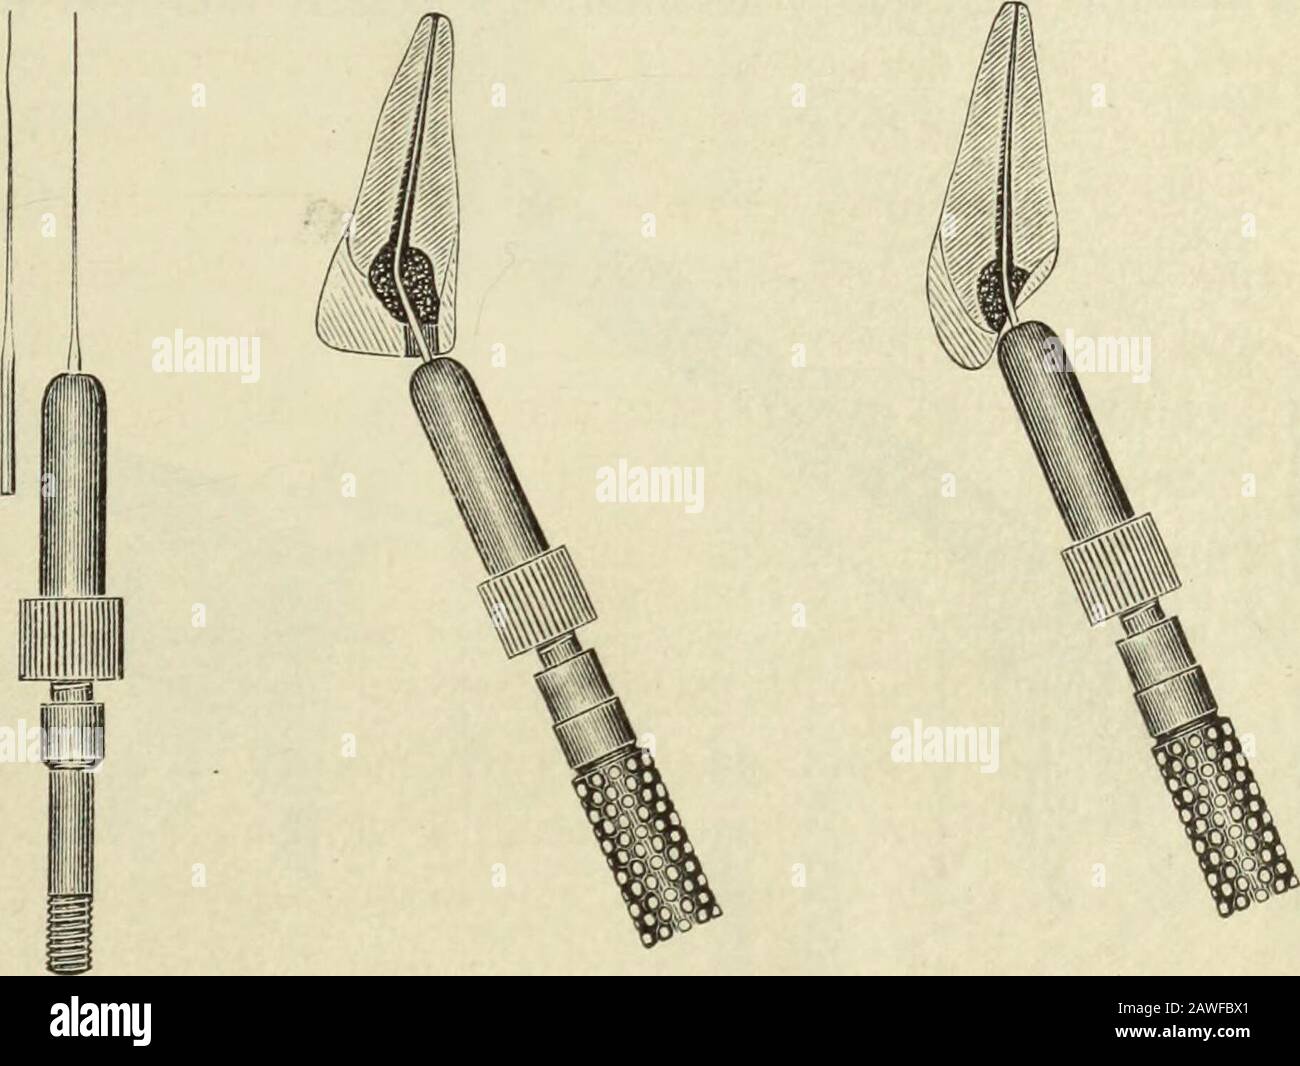 The Dental cosmos . (to the extent of five-eighths of an inch) the probe- ROOT-CANAL FILLING. 765 shank may be inserted. The chuck has a cone-socket shank whichmay be tightly screwed into any cone-socket handle, preferably a No. 1.Fig. 3 shows in section a pulpless superior incisor, into the canal ofwhich a probe is pushed until slight pain indicates the passage of theprobe barely through the foramen. The probe is then withdrawn one-sixteenth of an inch, and firmly fixed in the chuck so that the chuckend will stop against the end of the tooth when the end of the probeexactly reaches the forame Stock Photo